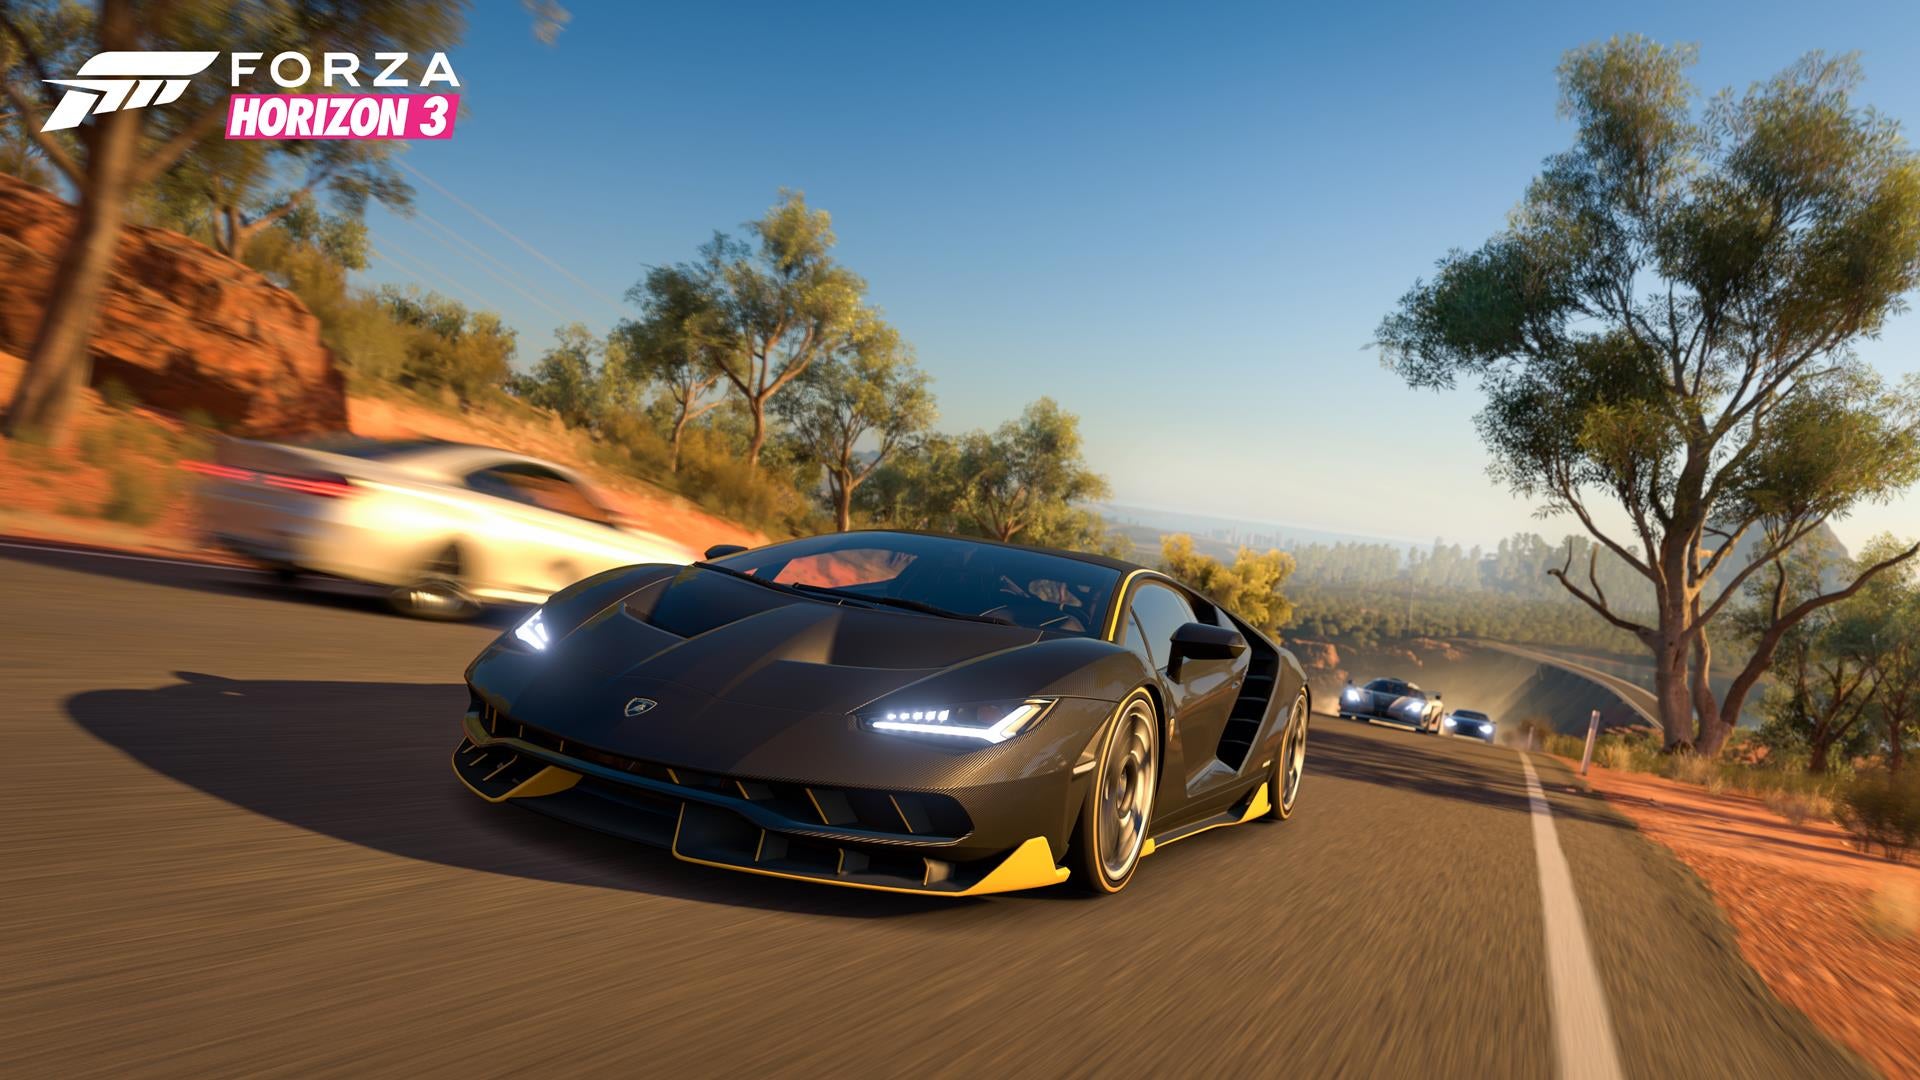 Image for Grab the Forza Horizon 3 demo now for Xbox One